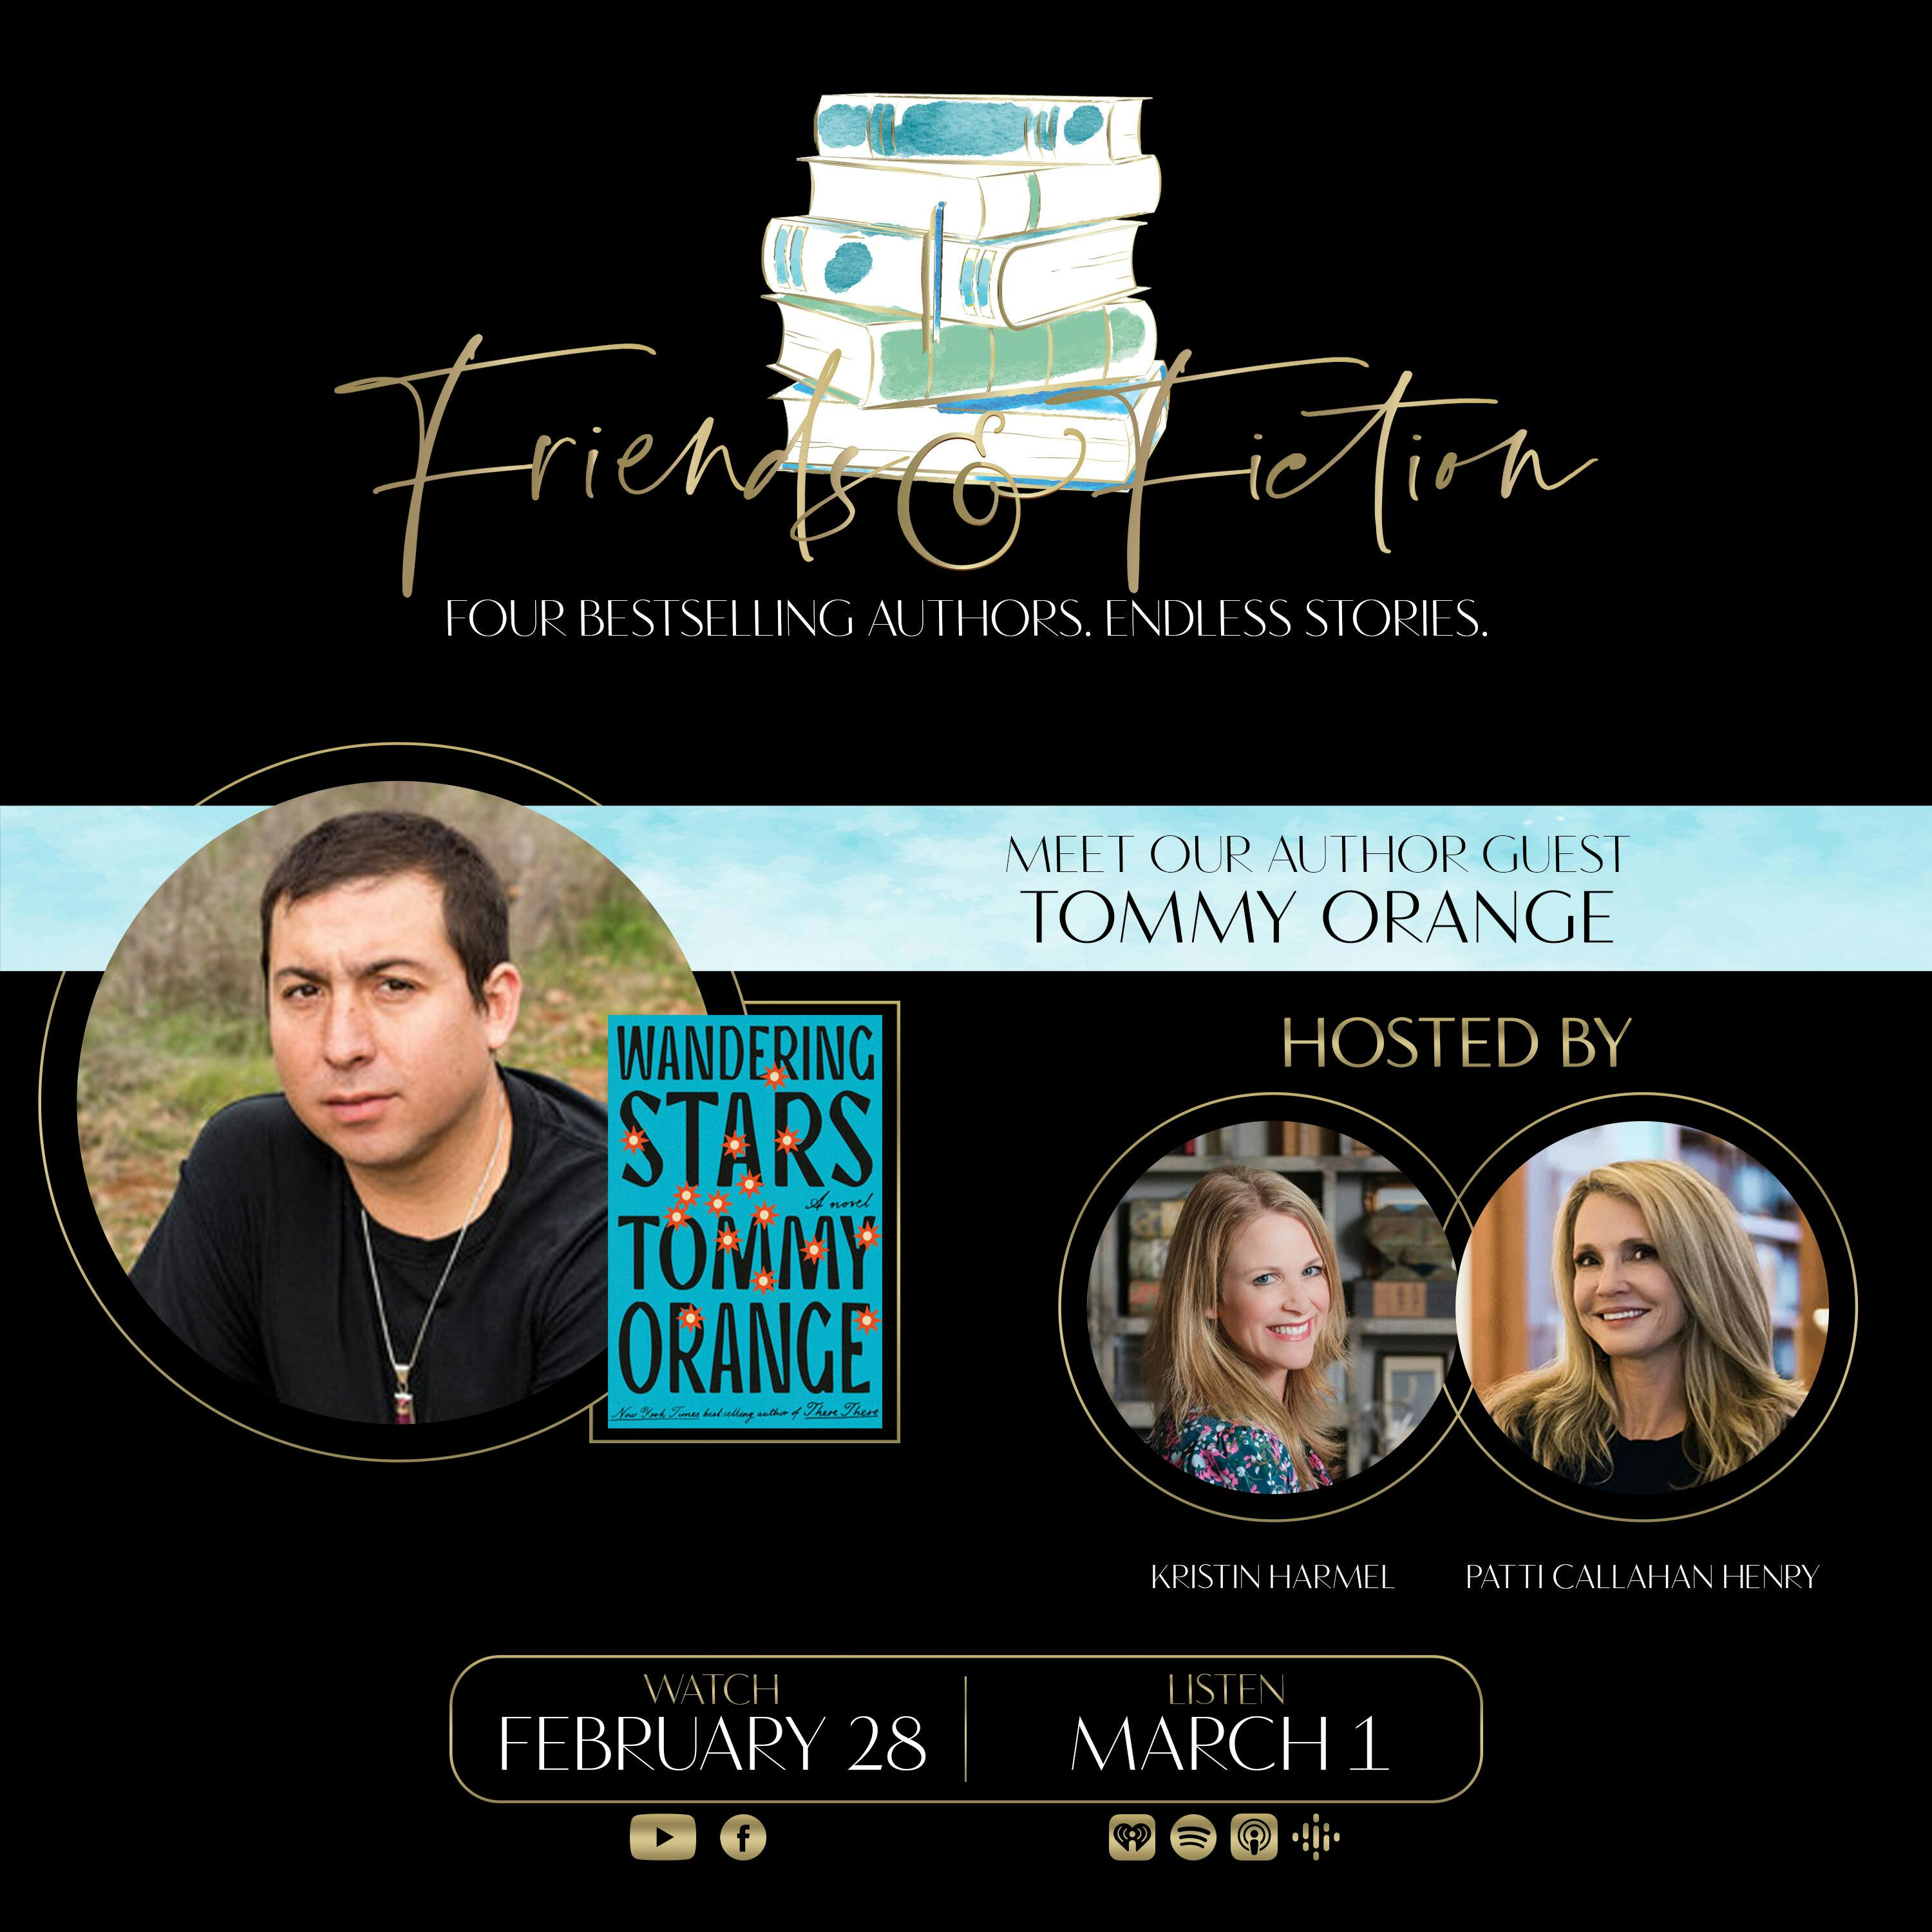 Friends & Fiction with Tommy Orange